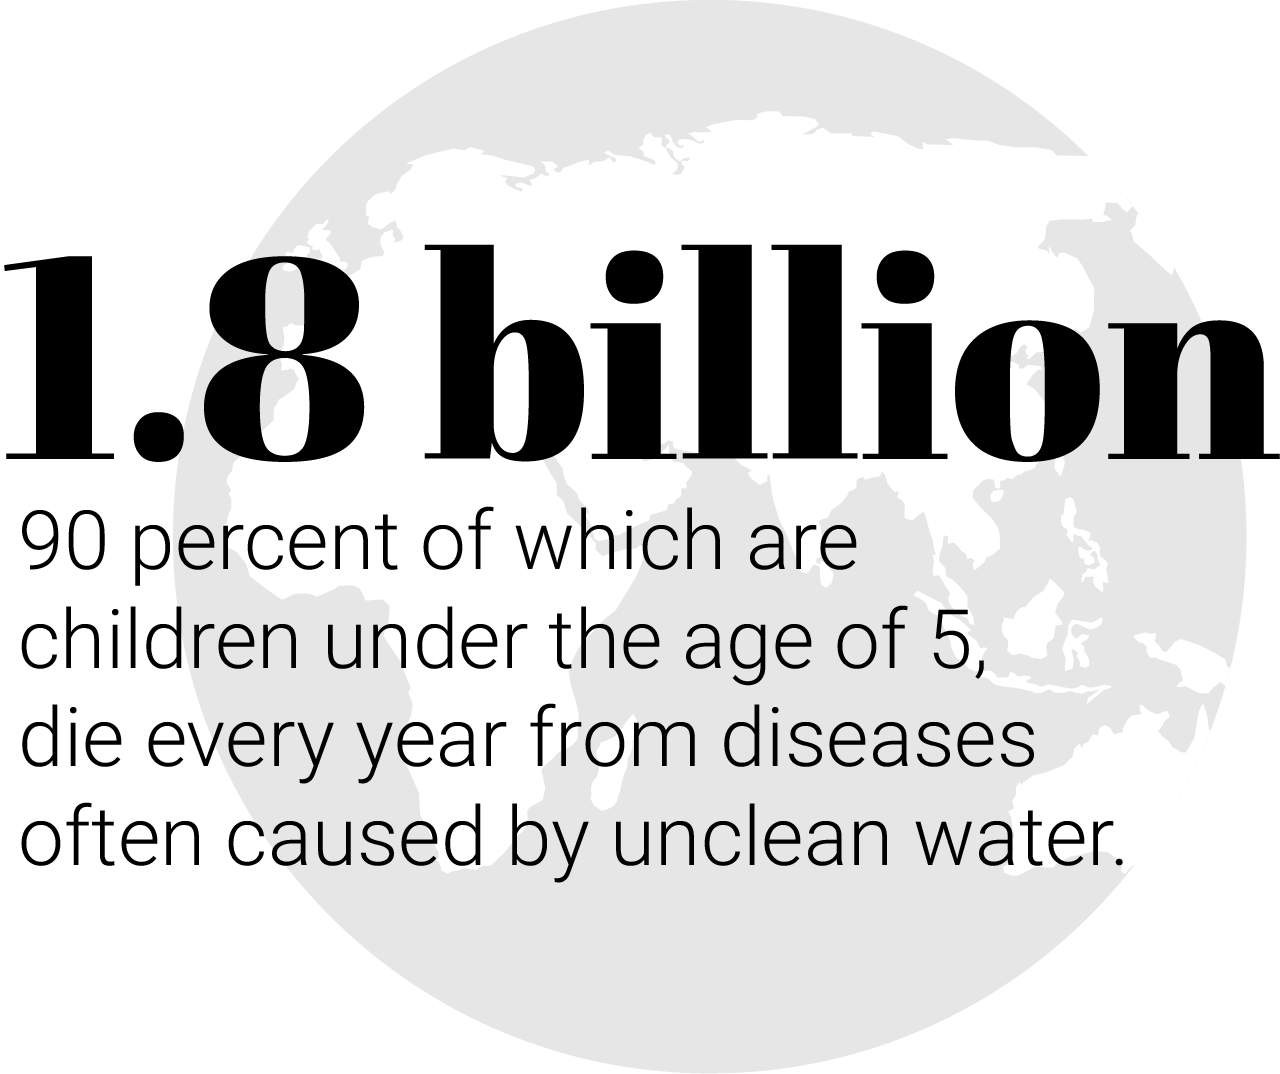 Approximately 1.8 billion people, 90 percent of which are children under the age of 5, die every year from diarrheal diseases, which are often caused by unclean water.